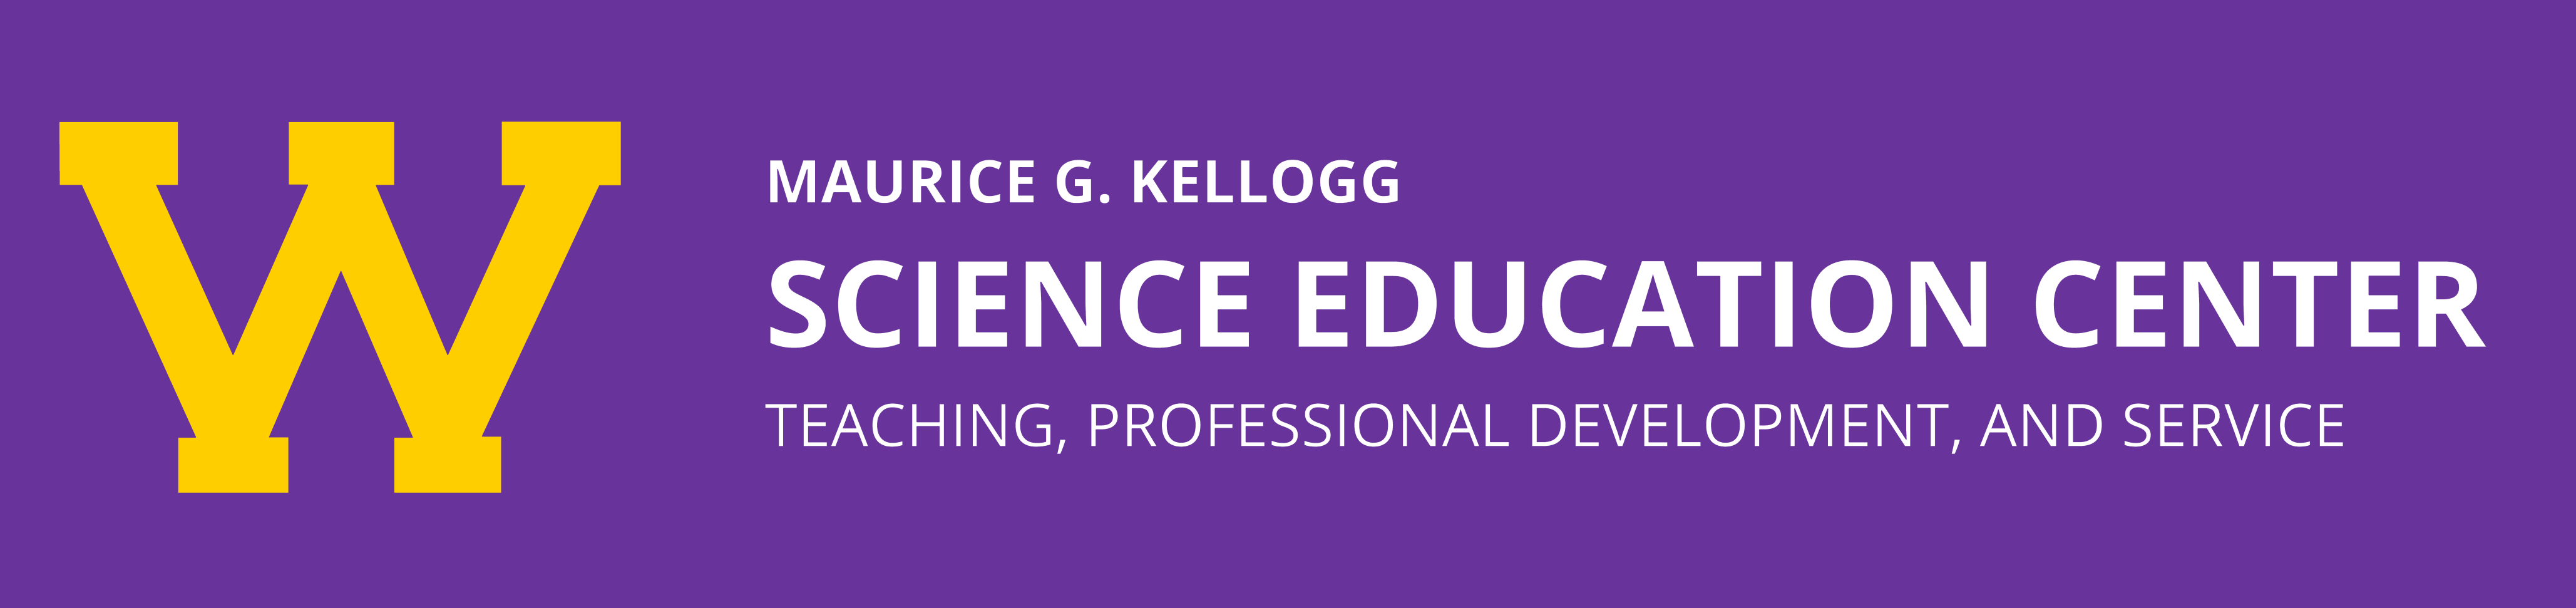 Maurice G. Kellogg Science Education Center. Teaching, Professional Development, and Service